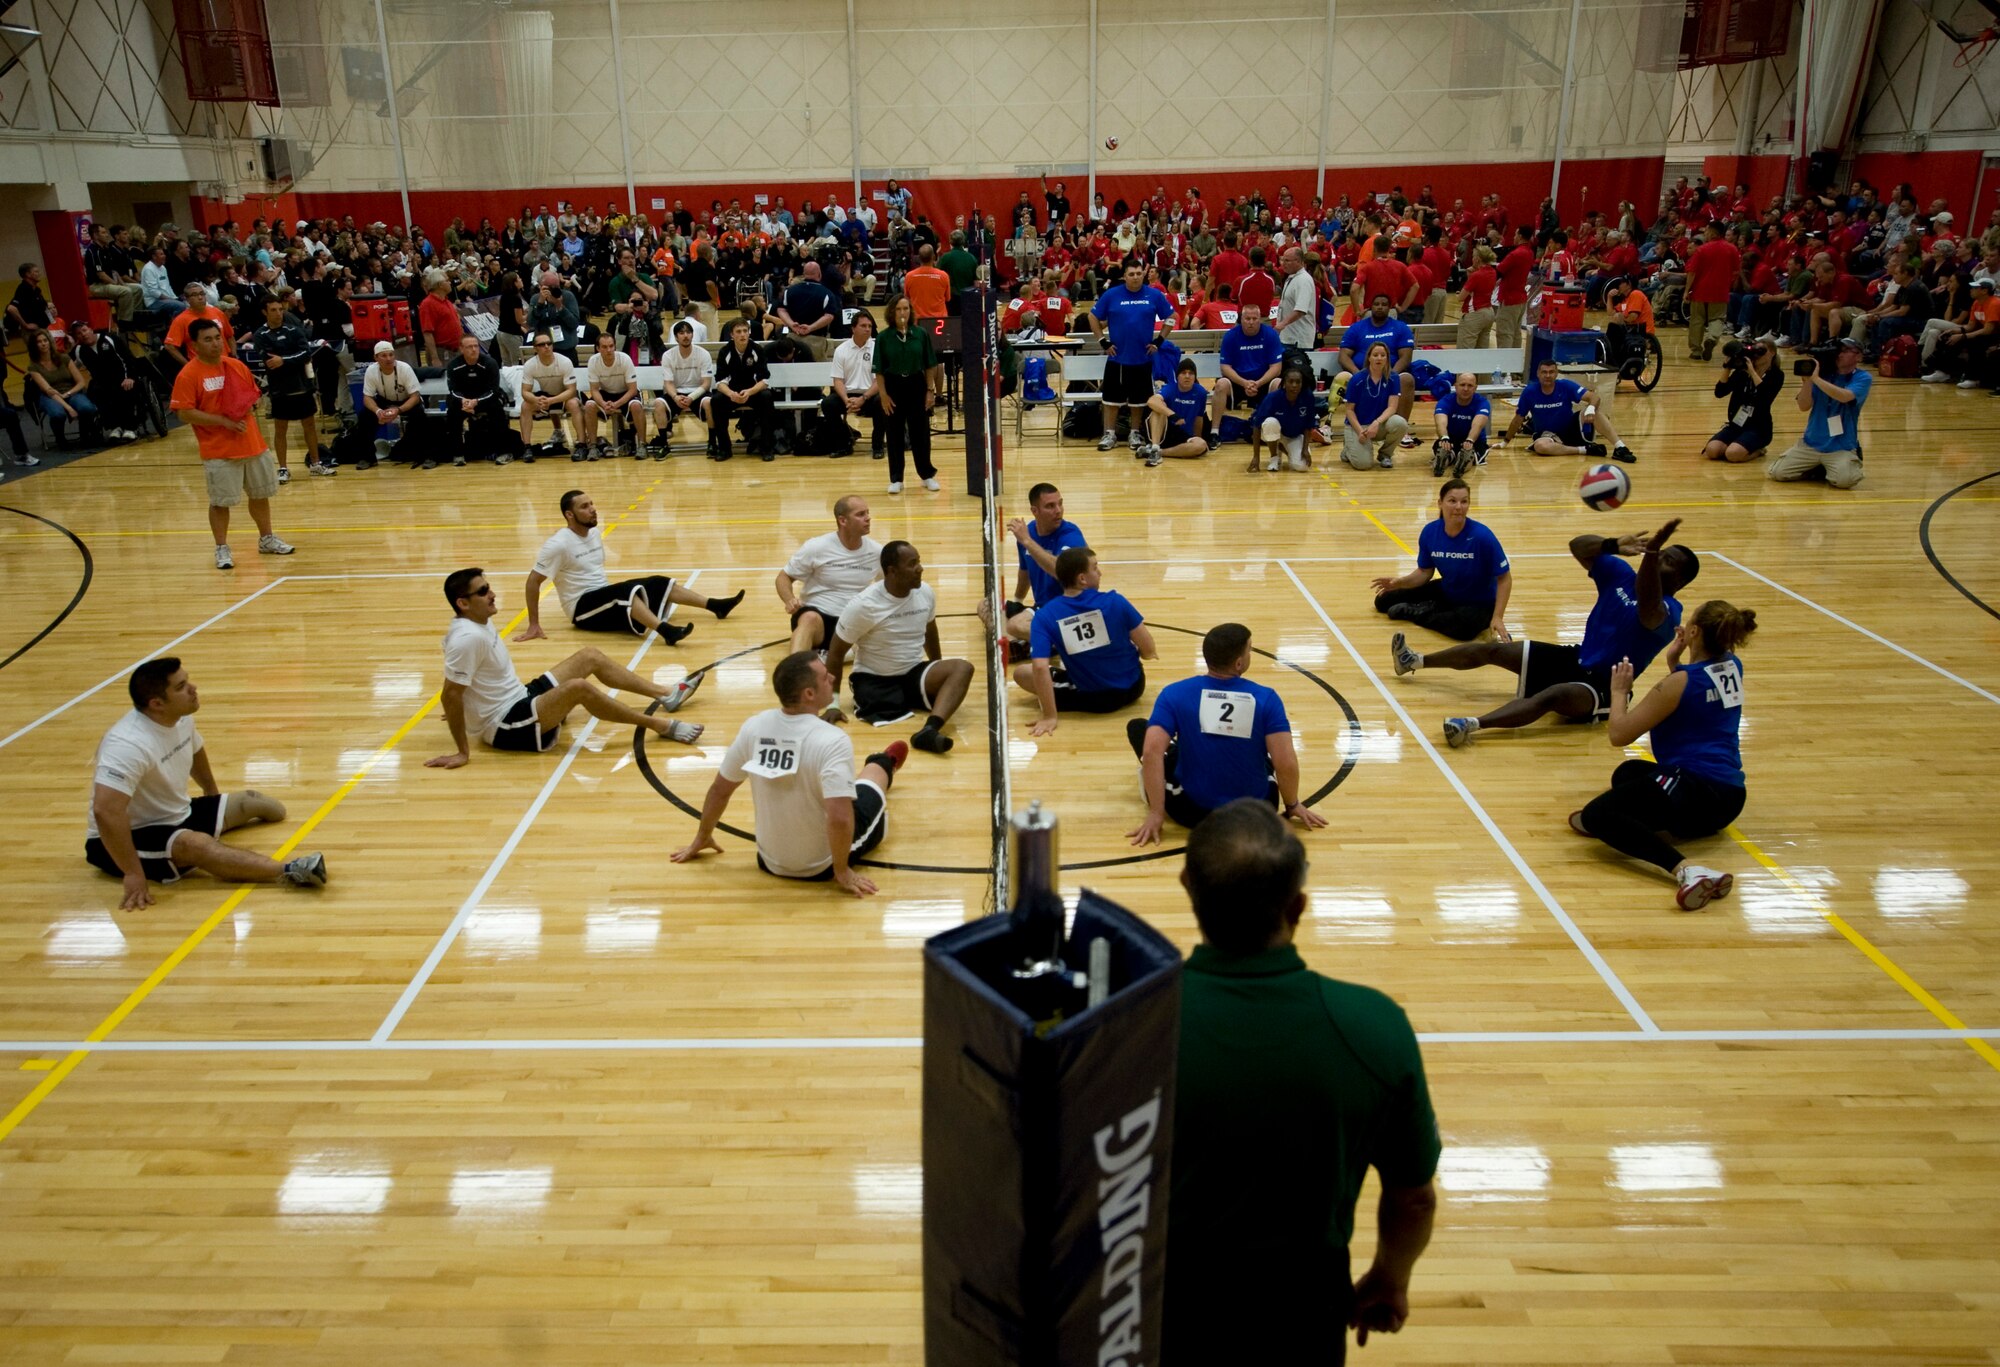 The Air Force and United States Special Operations Command battle during sitting volleyball competition at the 2011 Warrior Games in Colorado Springs, Colo., May 17. SOCOM won the series 2 games to 1. (U.S. Air Force photo/Staff Sgt. Christopher Griffin)